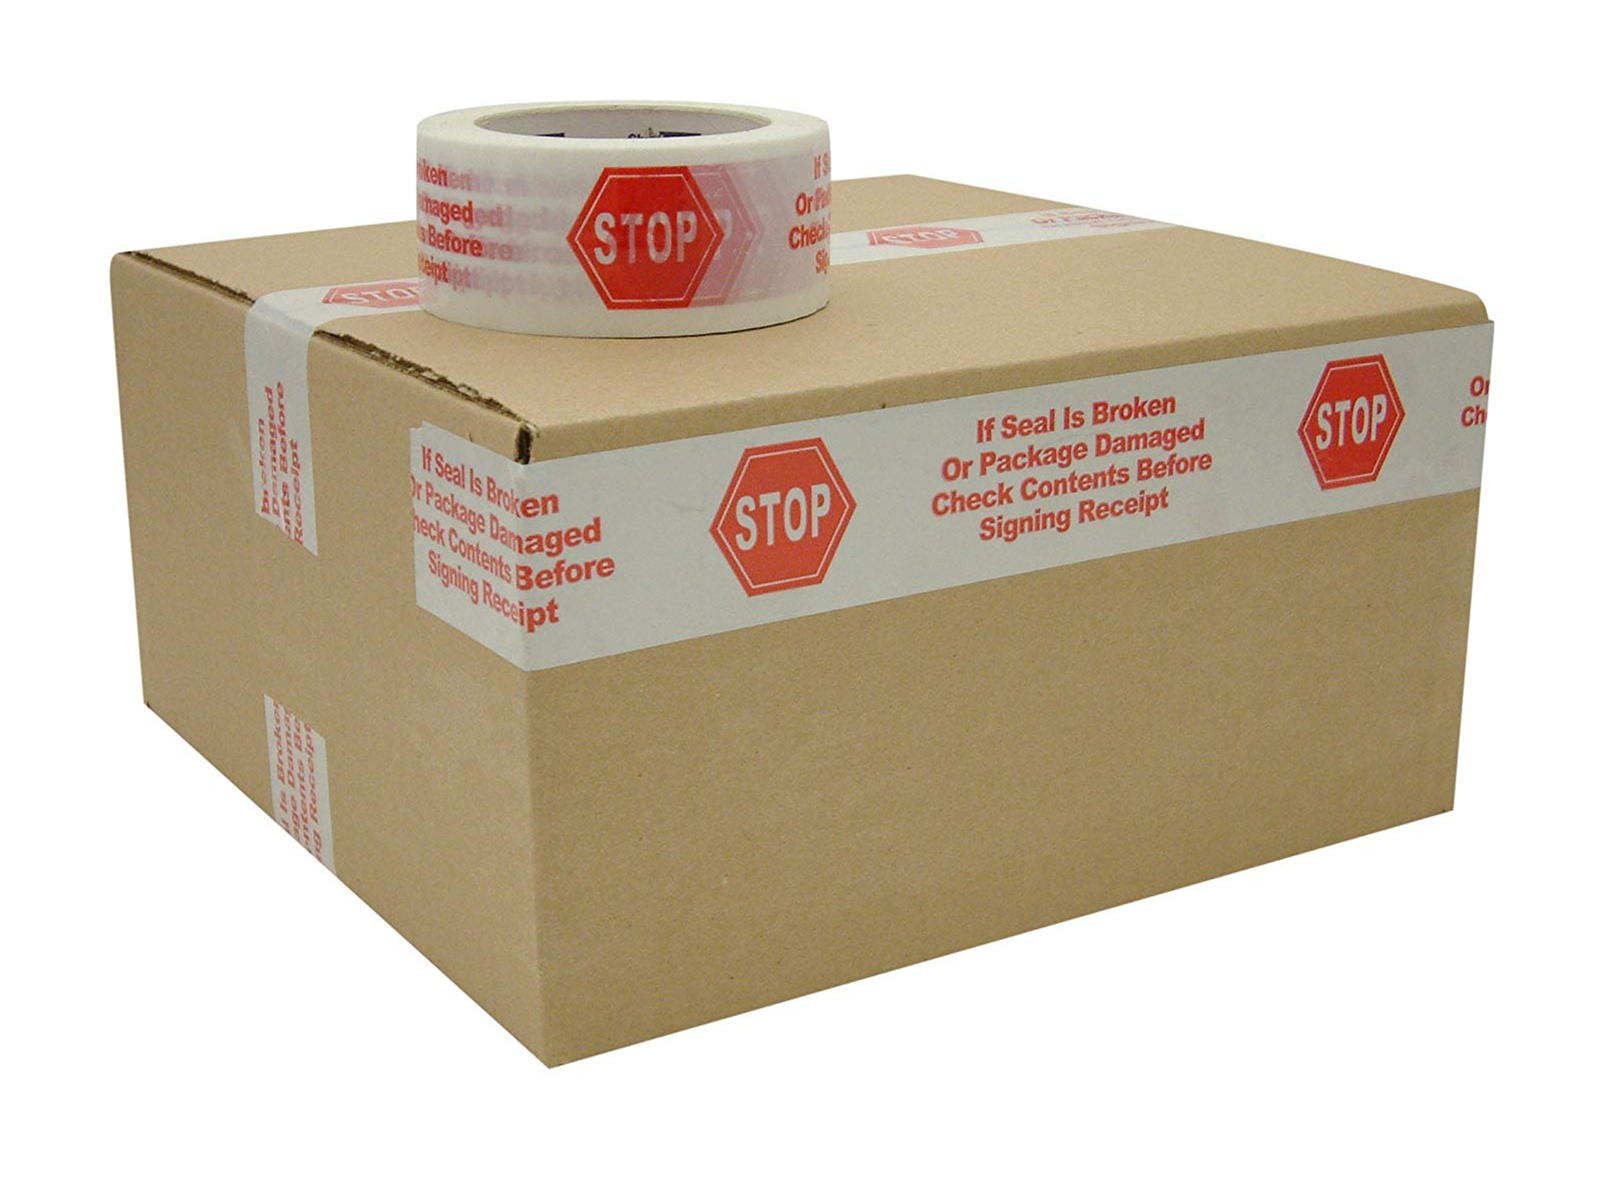 SECURITY CARTON SEALING TAPE.
HP240 STOP WHITE WITH RED
PRINT
48MM X 100M 36/CS